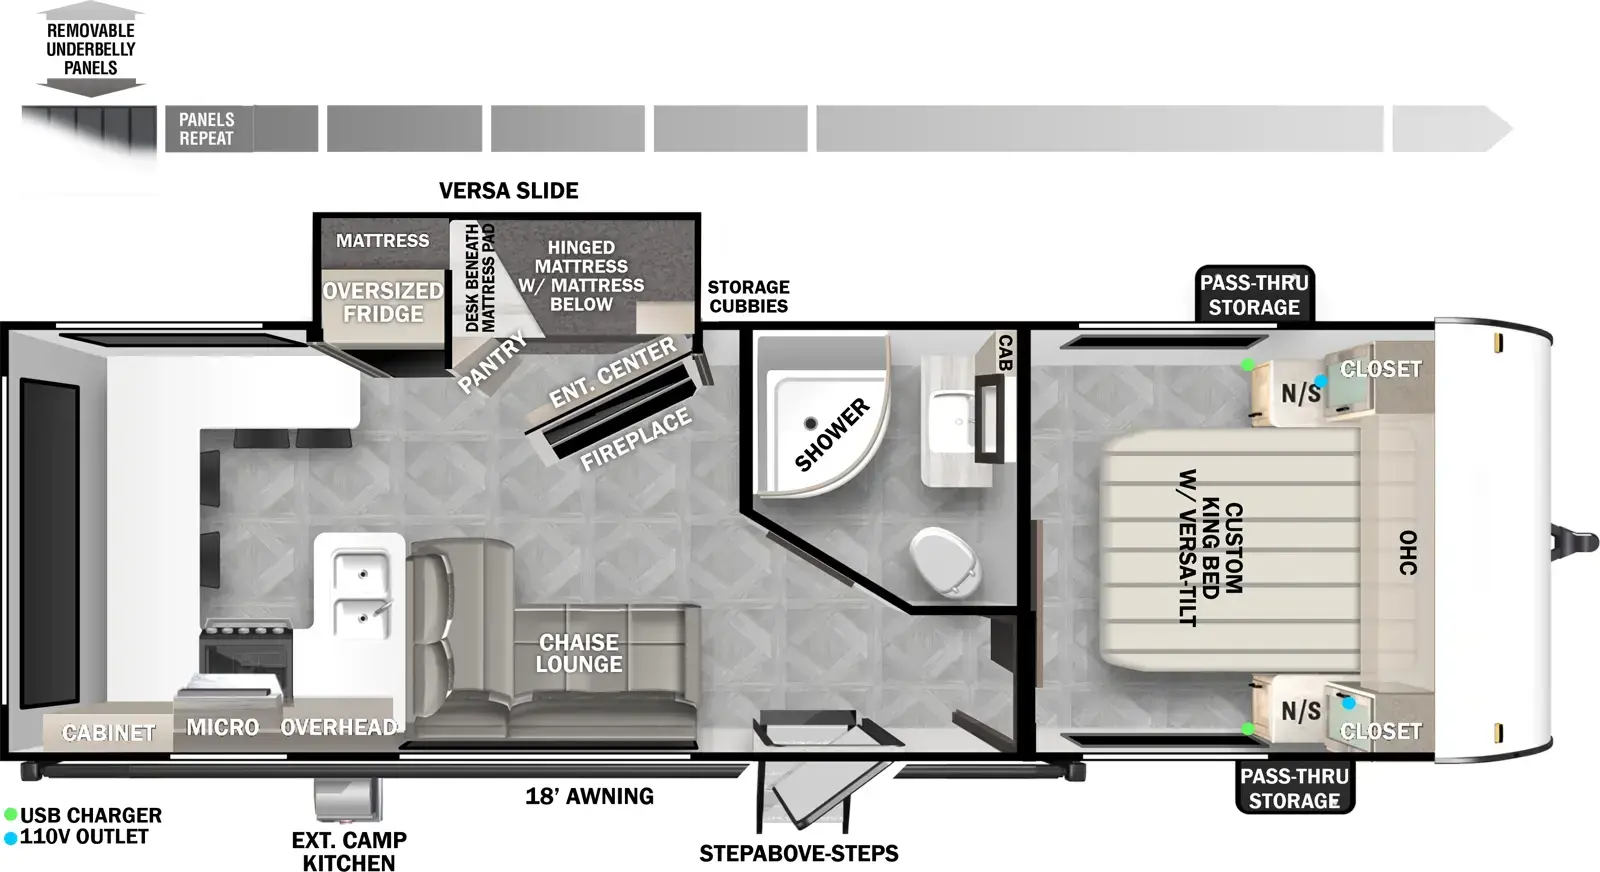 The 24VIEW has one slideout and one entry. Exterior features removable underbelly panels, pass-thru storage, StepAbove entry steps, exterior camp kitchen, and an 18 foot awning. Interior layout front to back: custom king bed with versa-tilt, overhead cabinet and closet with night stand on each side; off-door side full bathroom; door side entry, and chaise lounge; off-door side versa slideout features a hinged mattress with mattress below, pantry, storage cubbies, desk beneath mattress pad behind an entertainment center with fireplace, and oversized refrigerator; rear kitchen with peninsula kitchen counter that wraps all around the from door-side around the back to the off-door side with sink, overhead cabinet, microwave, cooktop, and barstools.